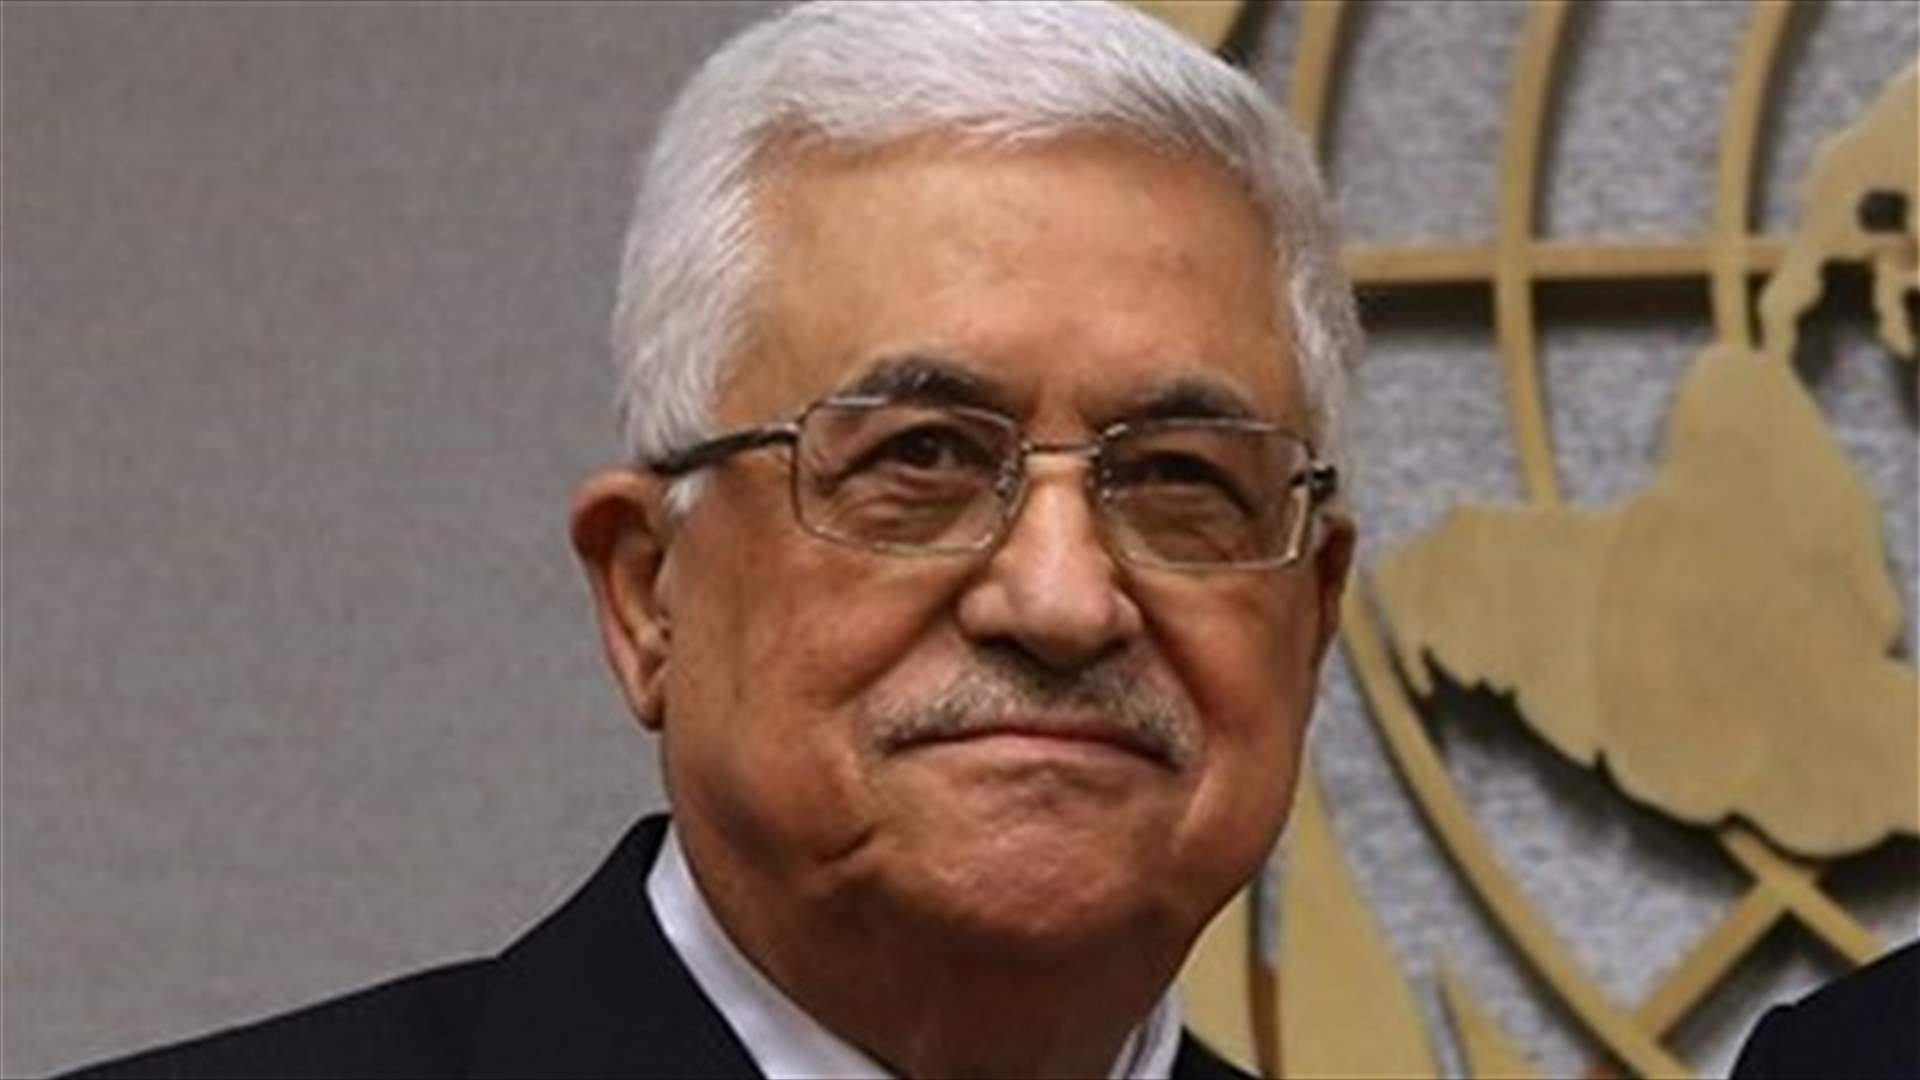 Palestinian President Abbas says US Embassy move would hurt peace